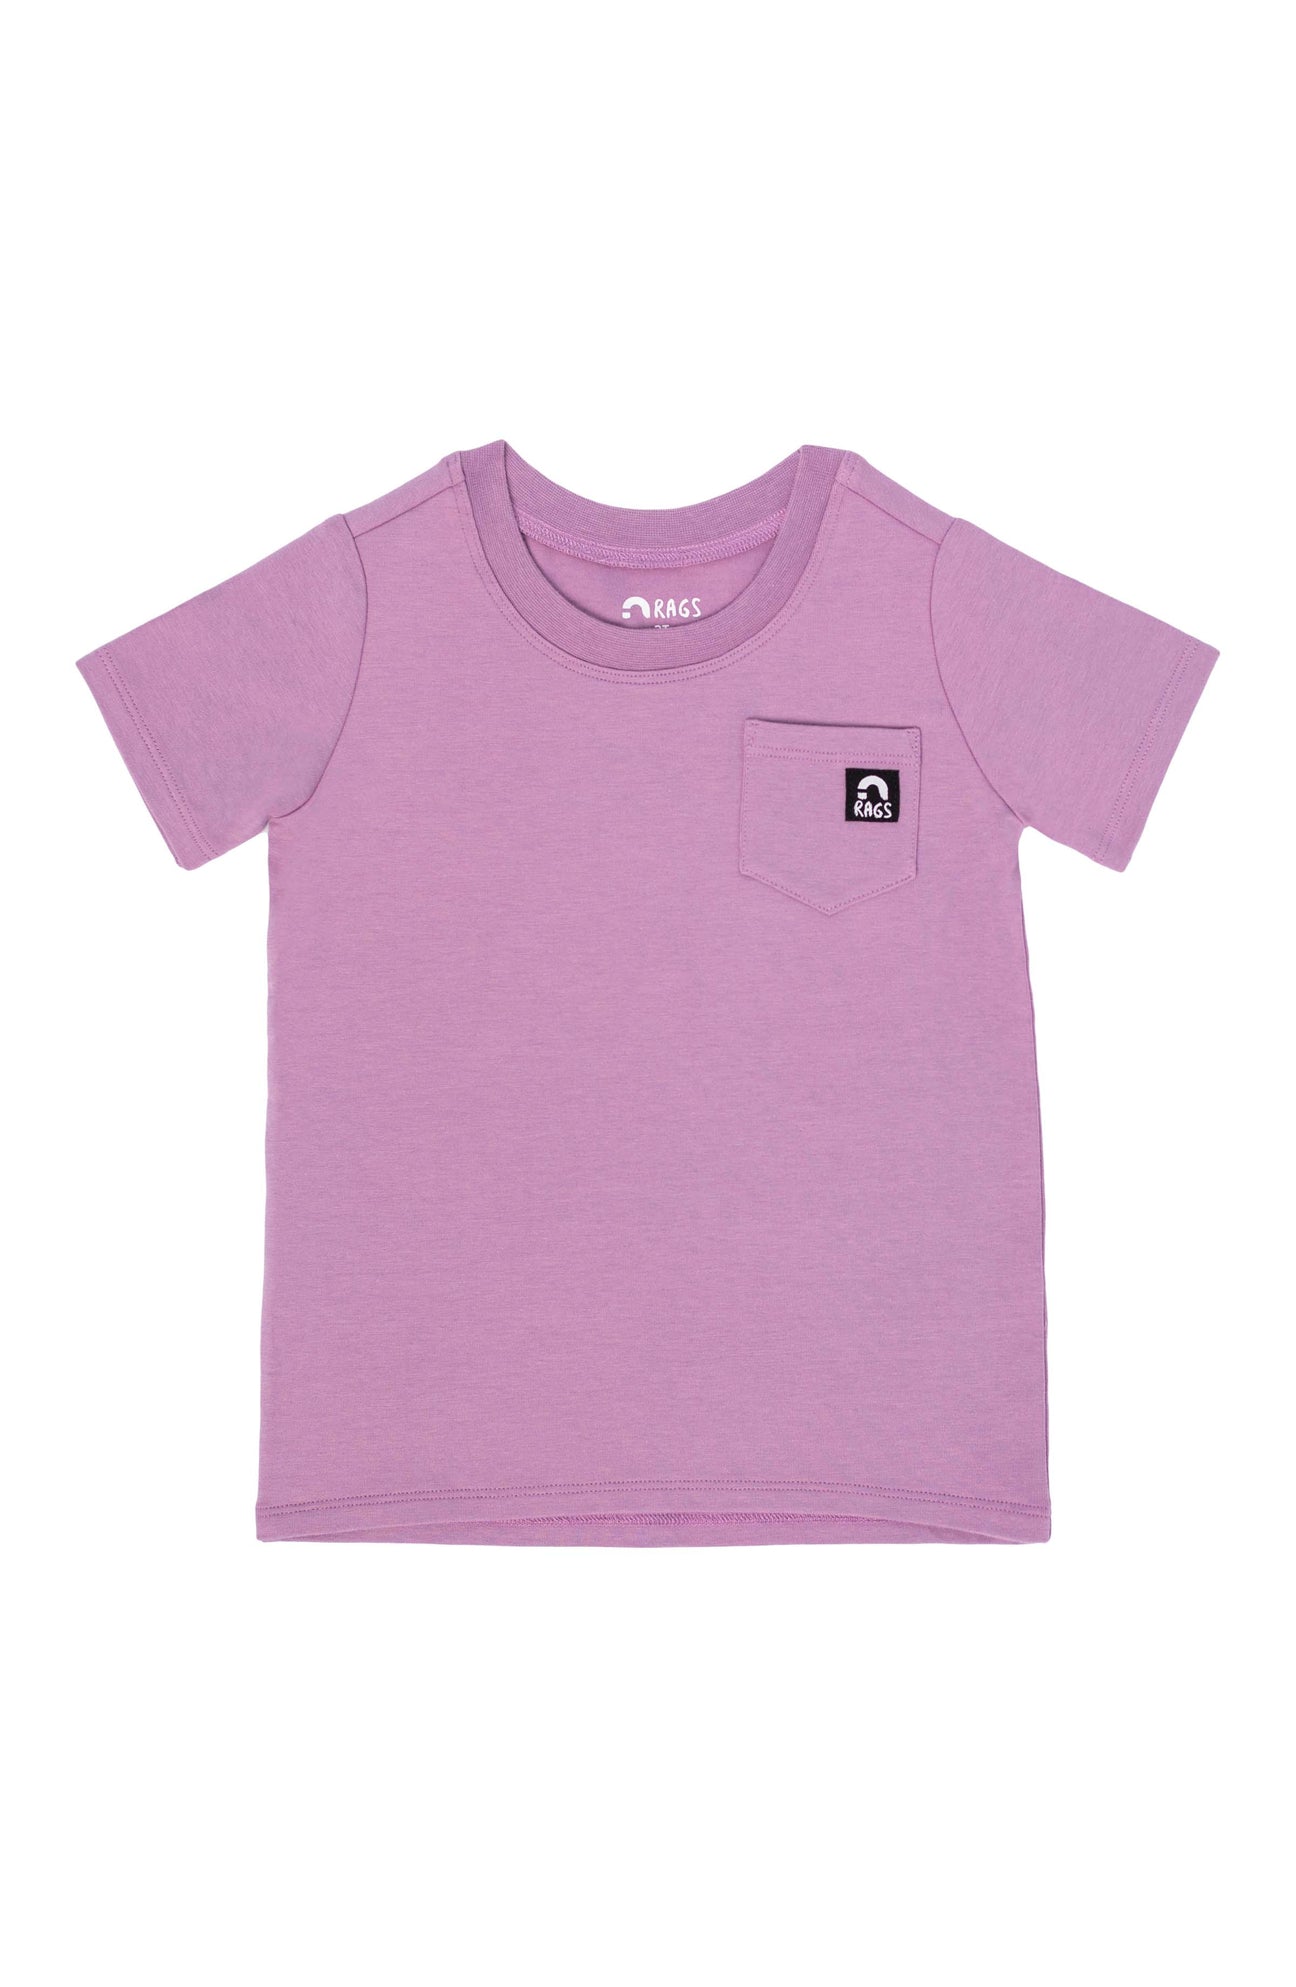 Essentials Short Sleeve Chest Pocket Rounded Tee - 'Lavender' TheT43Shop